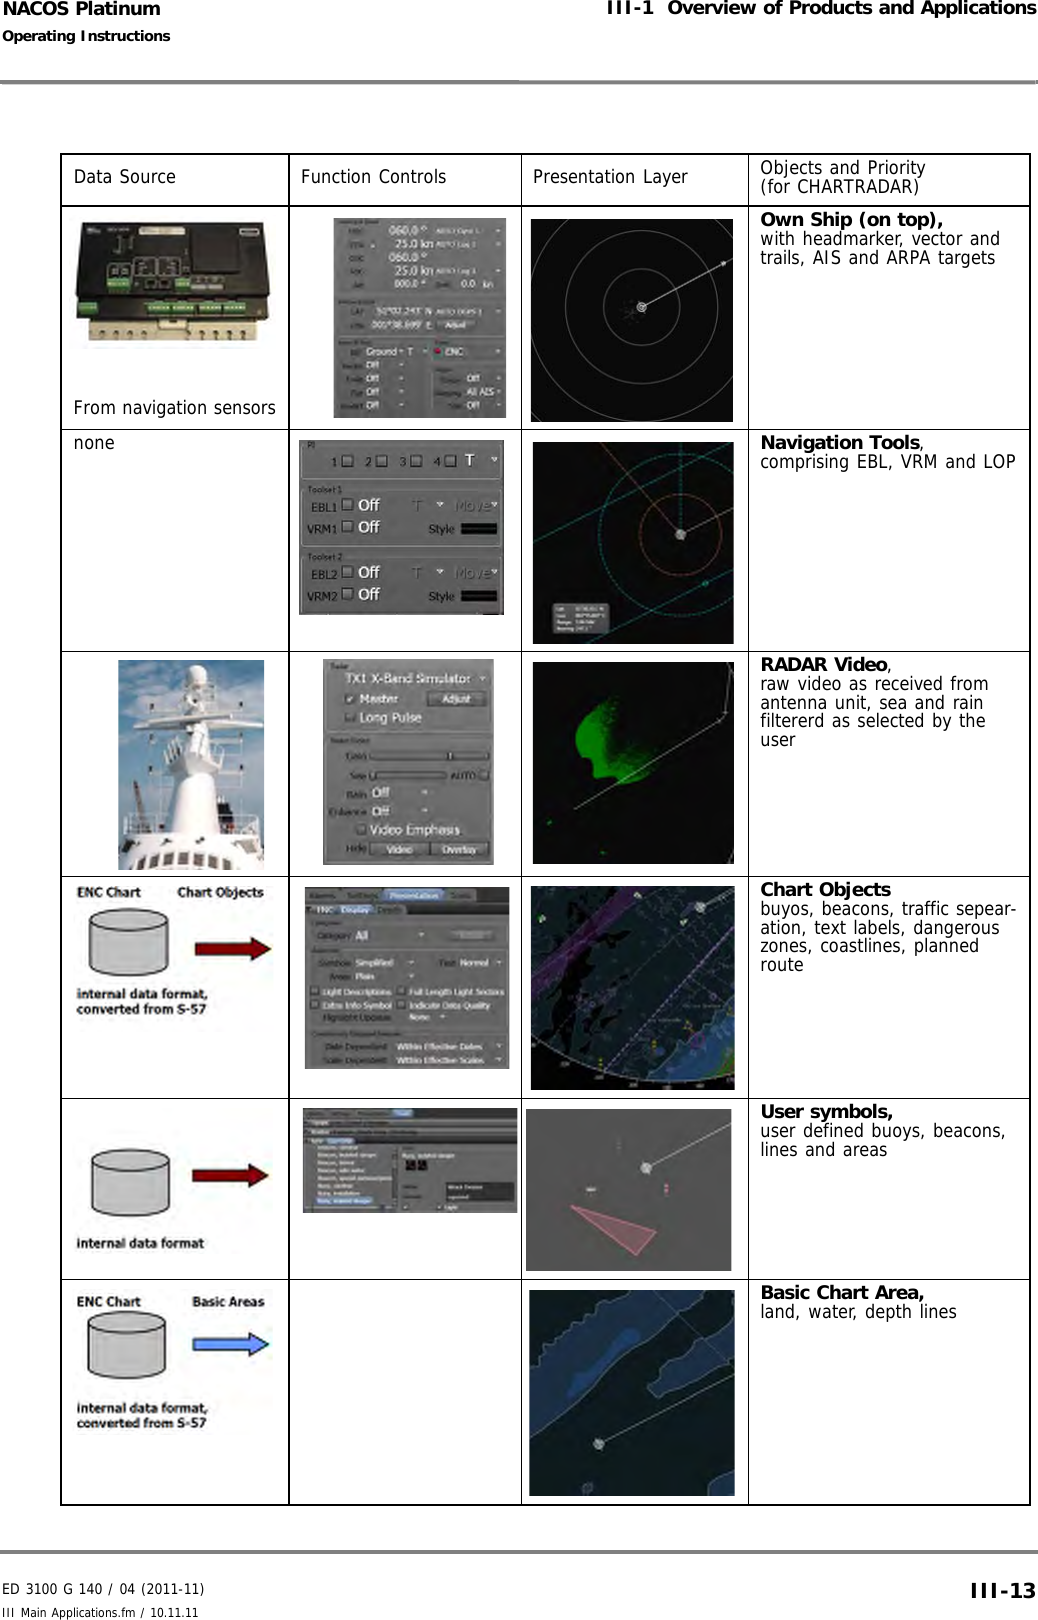 ED 3100 G 140 / 04 (2011-11)Operating InstructionsIII-1  Overview of Products and ApplicationsIII Main Applications.fm / 10.11.11 III-13NACOS PlatinumData Source Function Controls Presentation Layer Objects and Priority (for CHARTRADAR)From navigation sensorsOwn Ship (on top),with headmarker, vector and trails, AIS and ARPA targetsnone Navigation Tools, comprising EBL, VRM and LOPRADAR Video, raw video as received from antenna unit, sea and rain filtererd as selected by the userChart Objectsbuyos, beacons, traffic sepear-ation, text labels, dangerous zones, coastlines, planned routeUser symbols,user defined buoys, beacons, lines and areasBasic Chart Area,land, water, depth lines